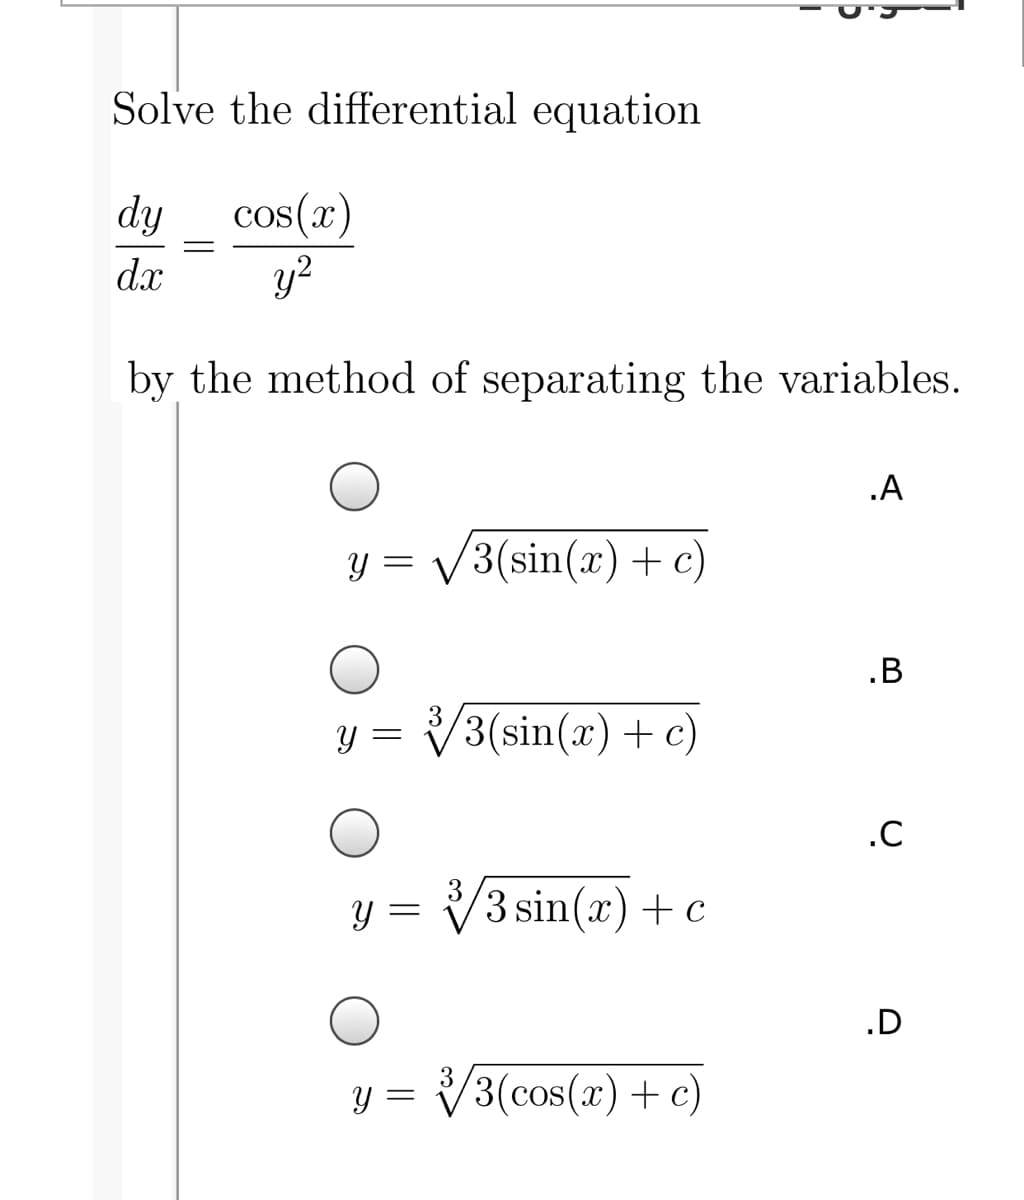 Solve the differential equation
cos(x)
y?
dy
dx
by the method of separating the variables.
.A
y = /3(sin(x) + c)
.B
y = V3(sin(x) + c)
.C
Y =
y = V3 sin(x) +c
.D
y =
V3(cos(x) + c)
